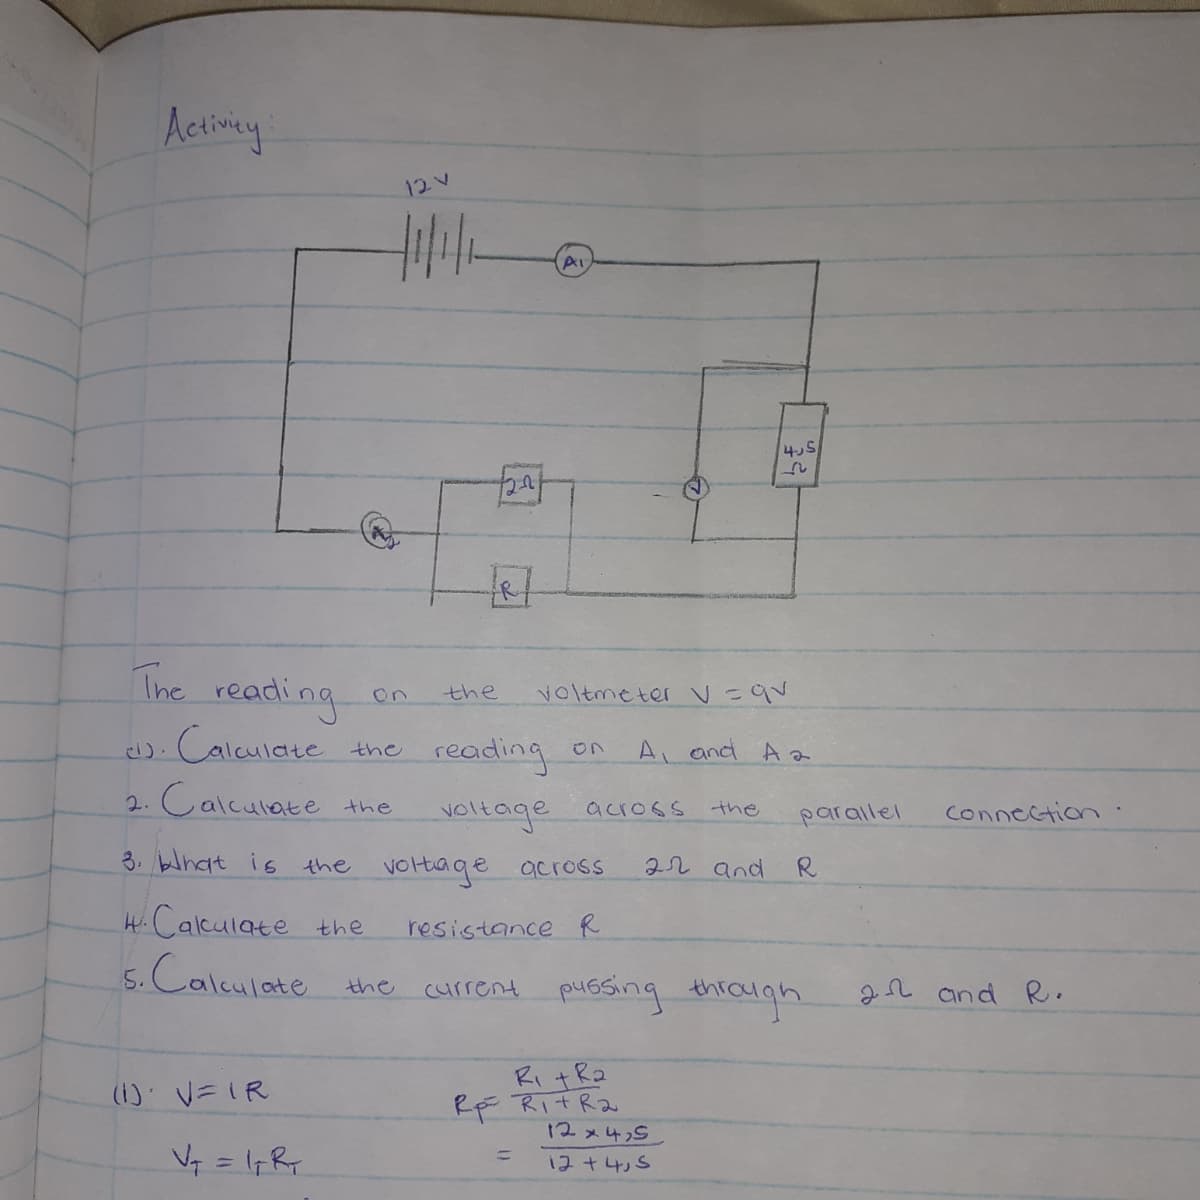 12
4.5
The reading
on
the
Voltmeter V=qv
). Calculate the reading
A, and Aa
2. Calculate the
voltage across
3. blhat is the voltiage across
the
parallel
Connection
22 and R
HCalculate the
resistance R
5.Calculate the current pussing thiaigh
.
2n and R.
Ri +Ra
RF RitRa
12メ4S」
(1): V=IR
%3D
12+4,5
